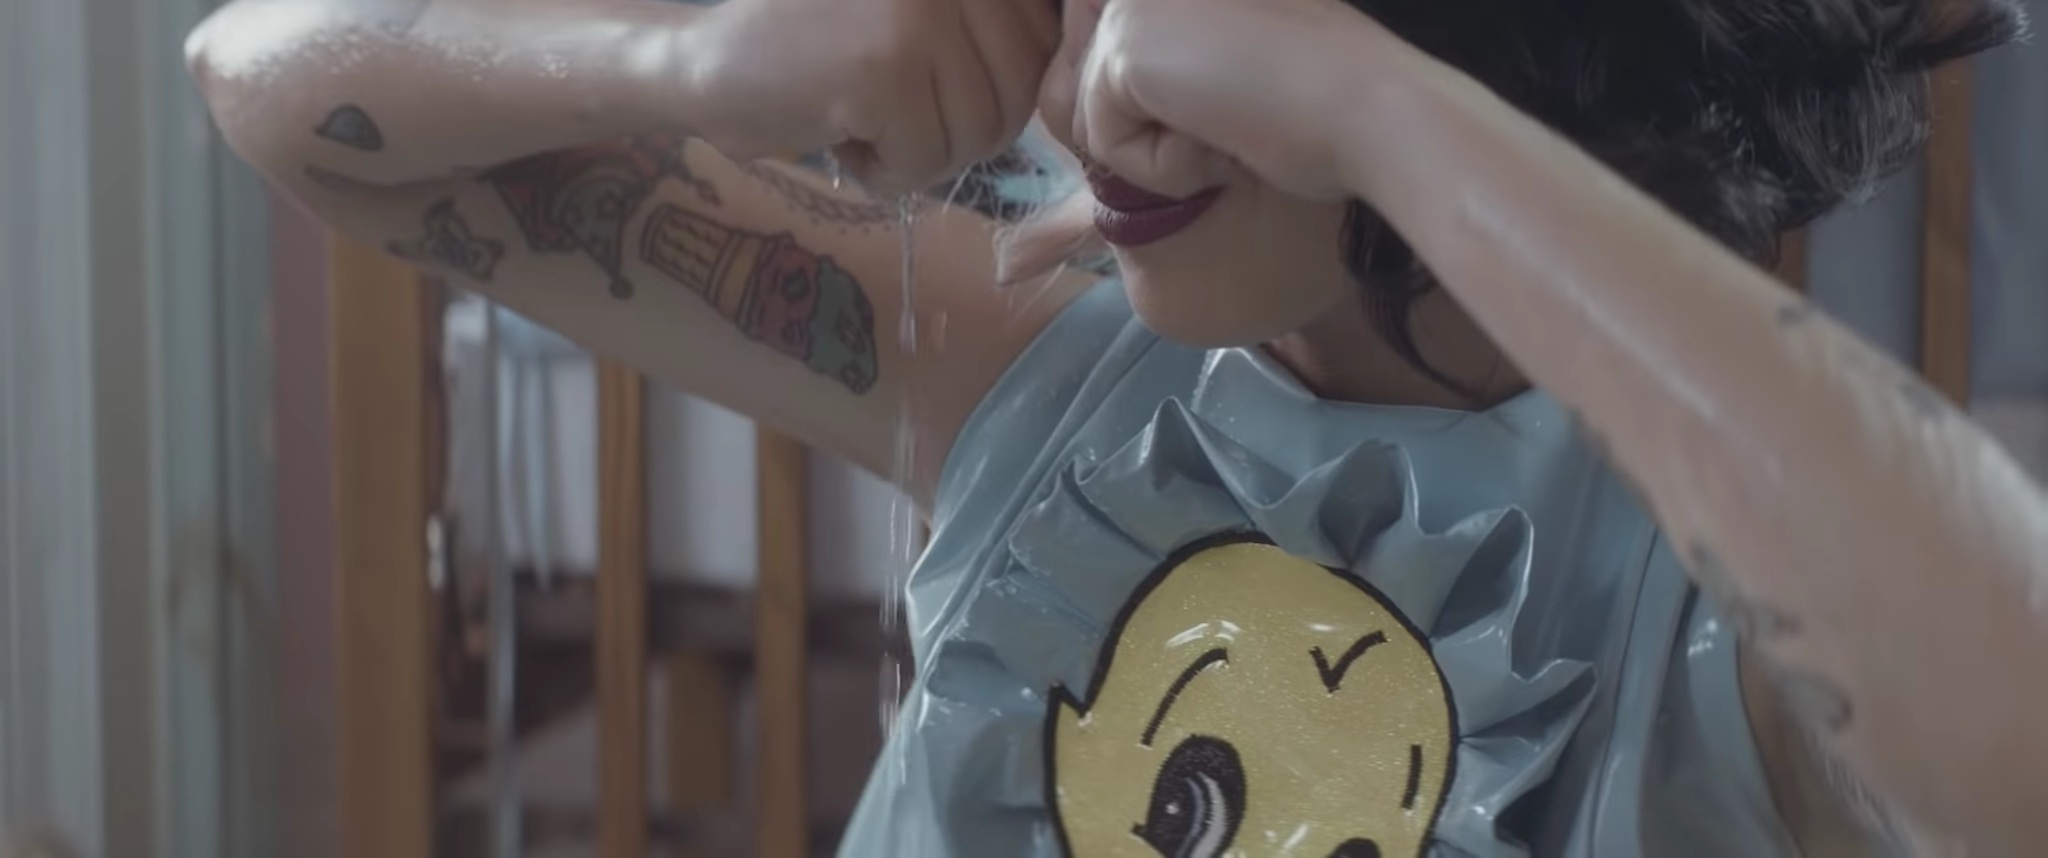 6 years ago, melanie martinez released "cry baby" music video. ♡....